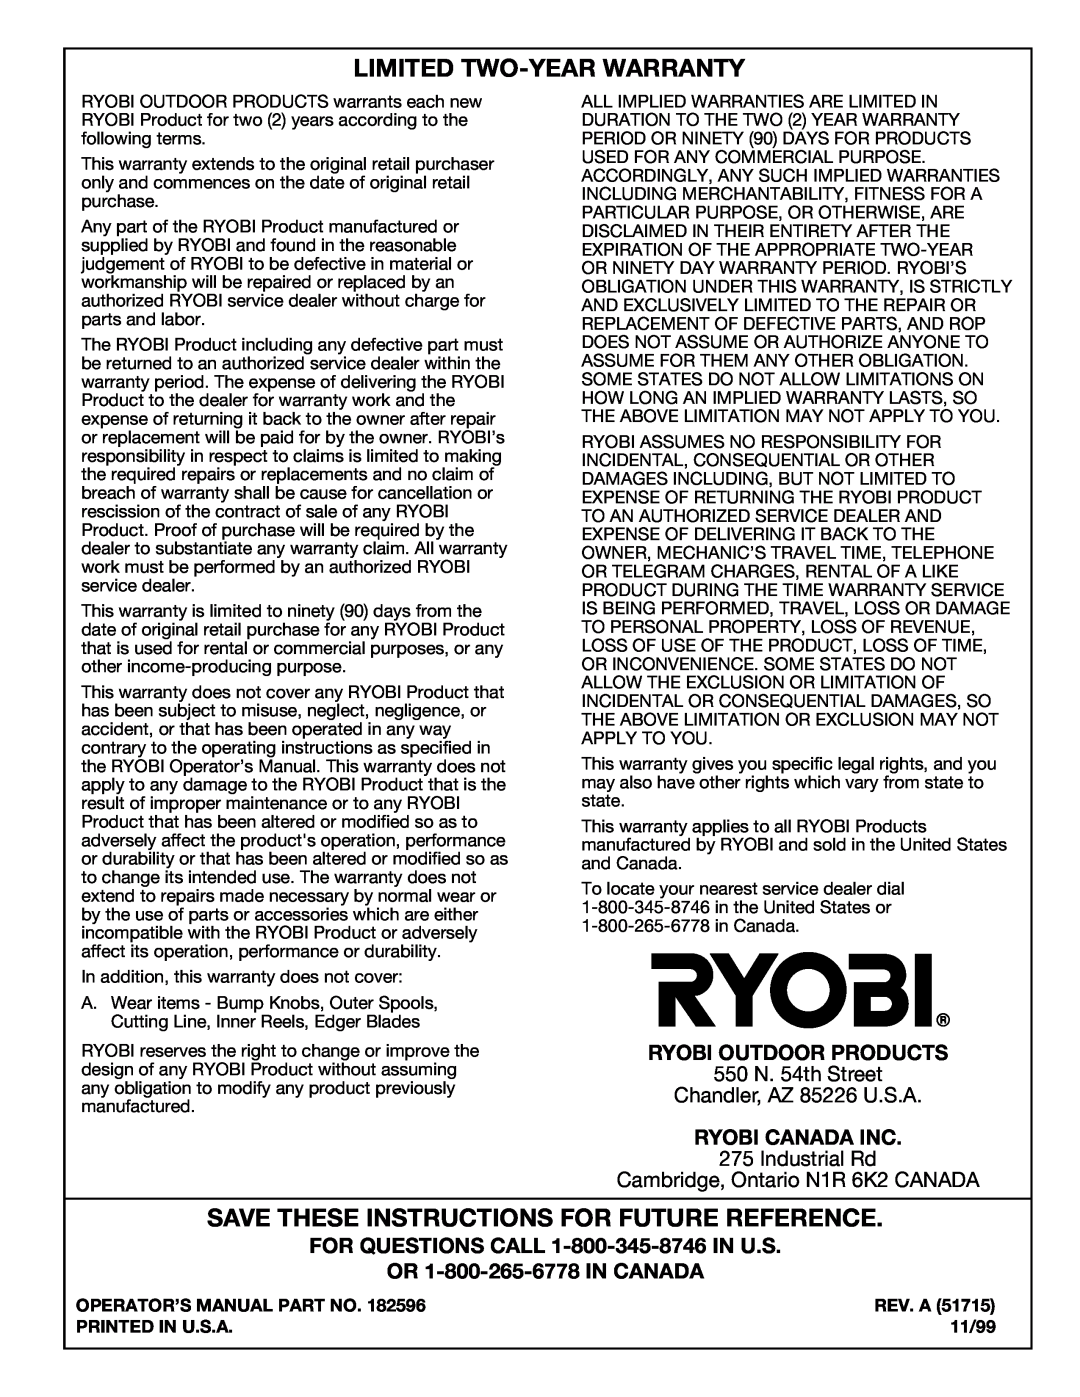 Ryobi 130rEB manual Limited Two-Year Warranty, Save These Instructions For Future Reference, Ryobi Outdoor Products, Rev. A 